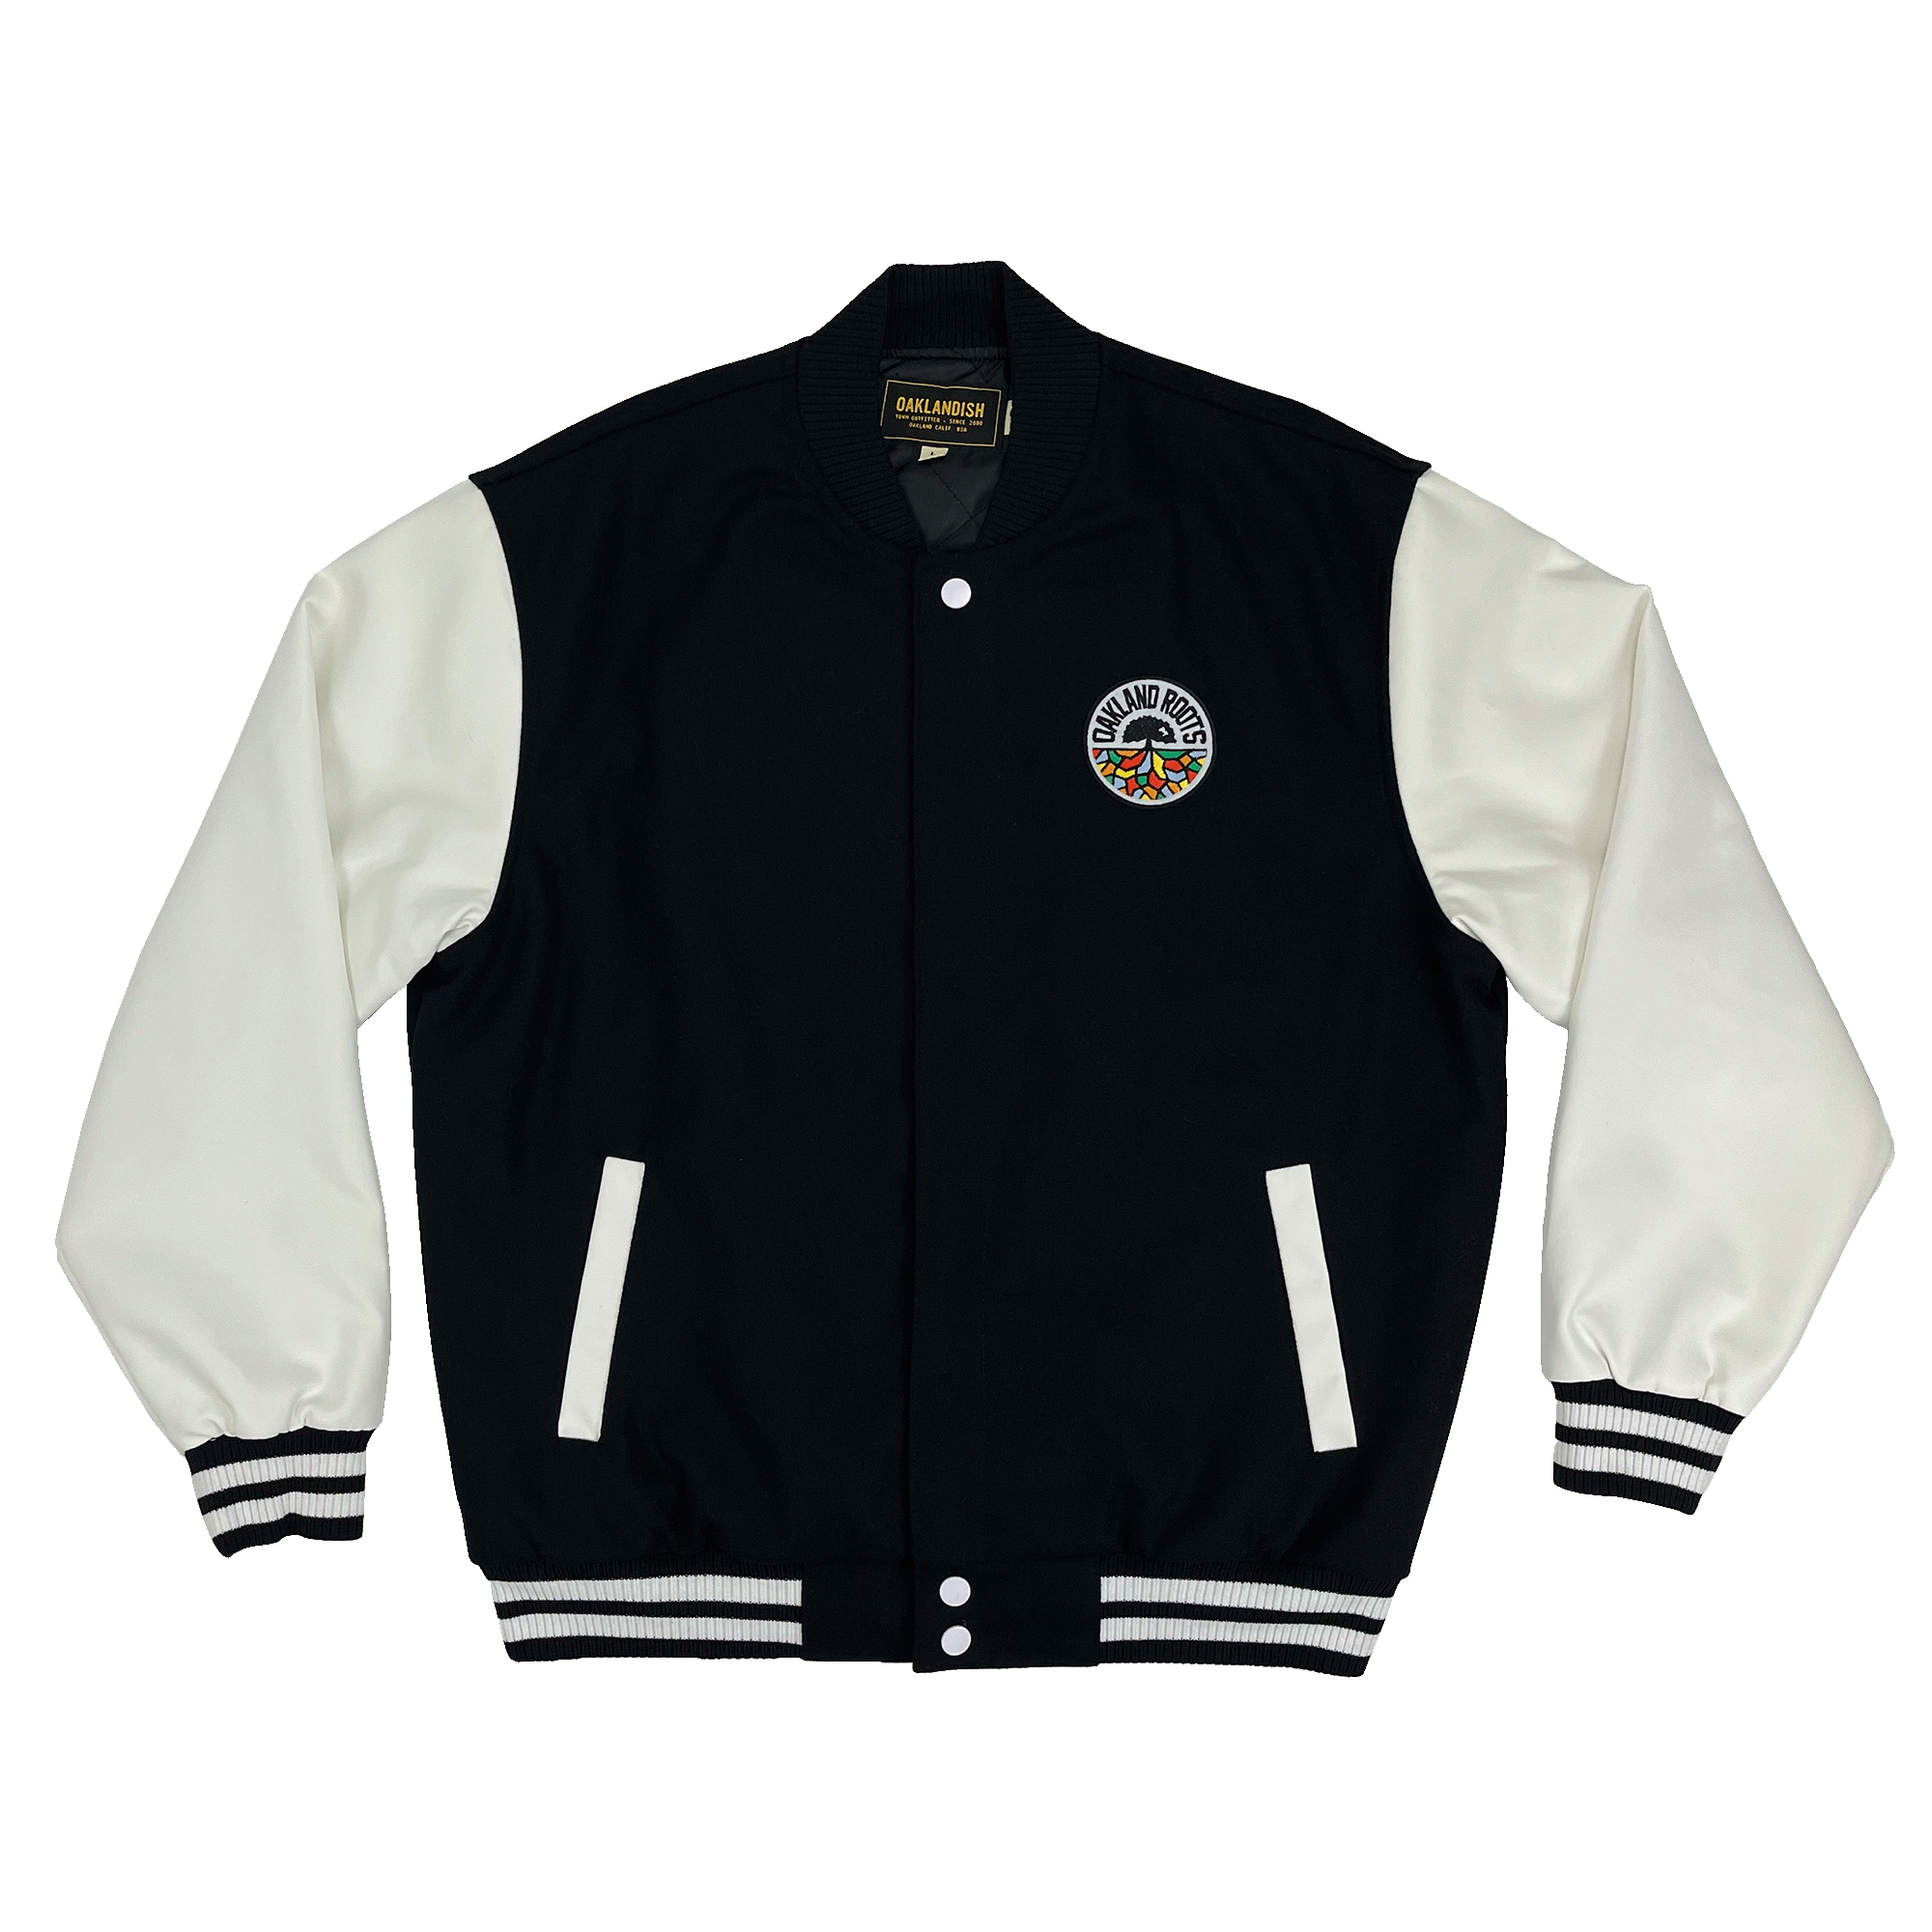 Black varsity jacket with white sleeves and black and white striped trim with full-color Oakland Roots logo on the left chest wearside.